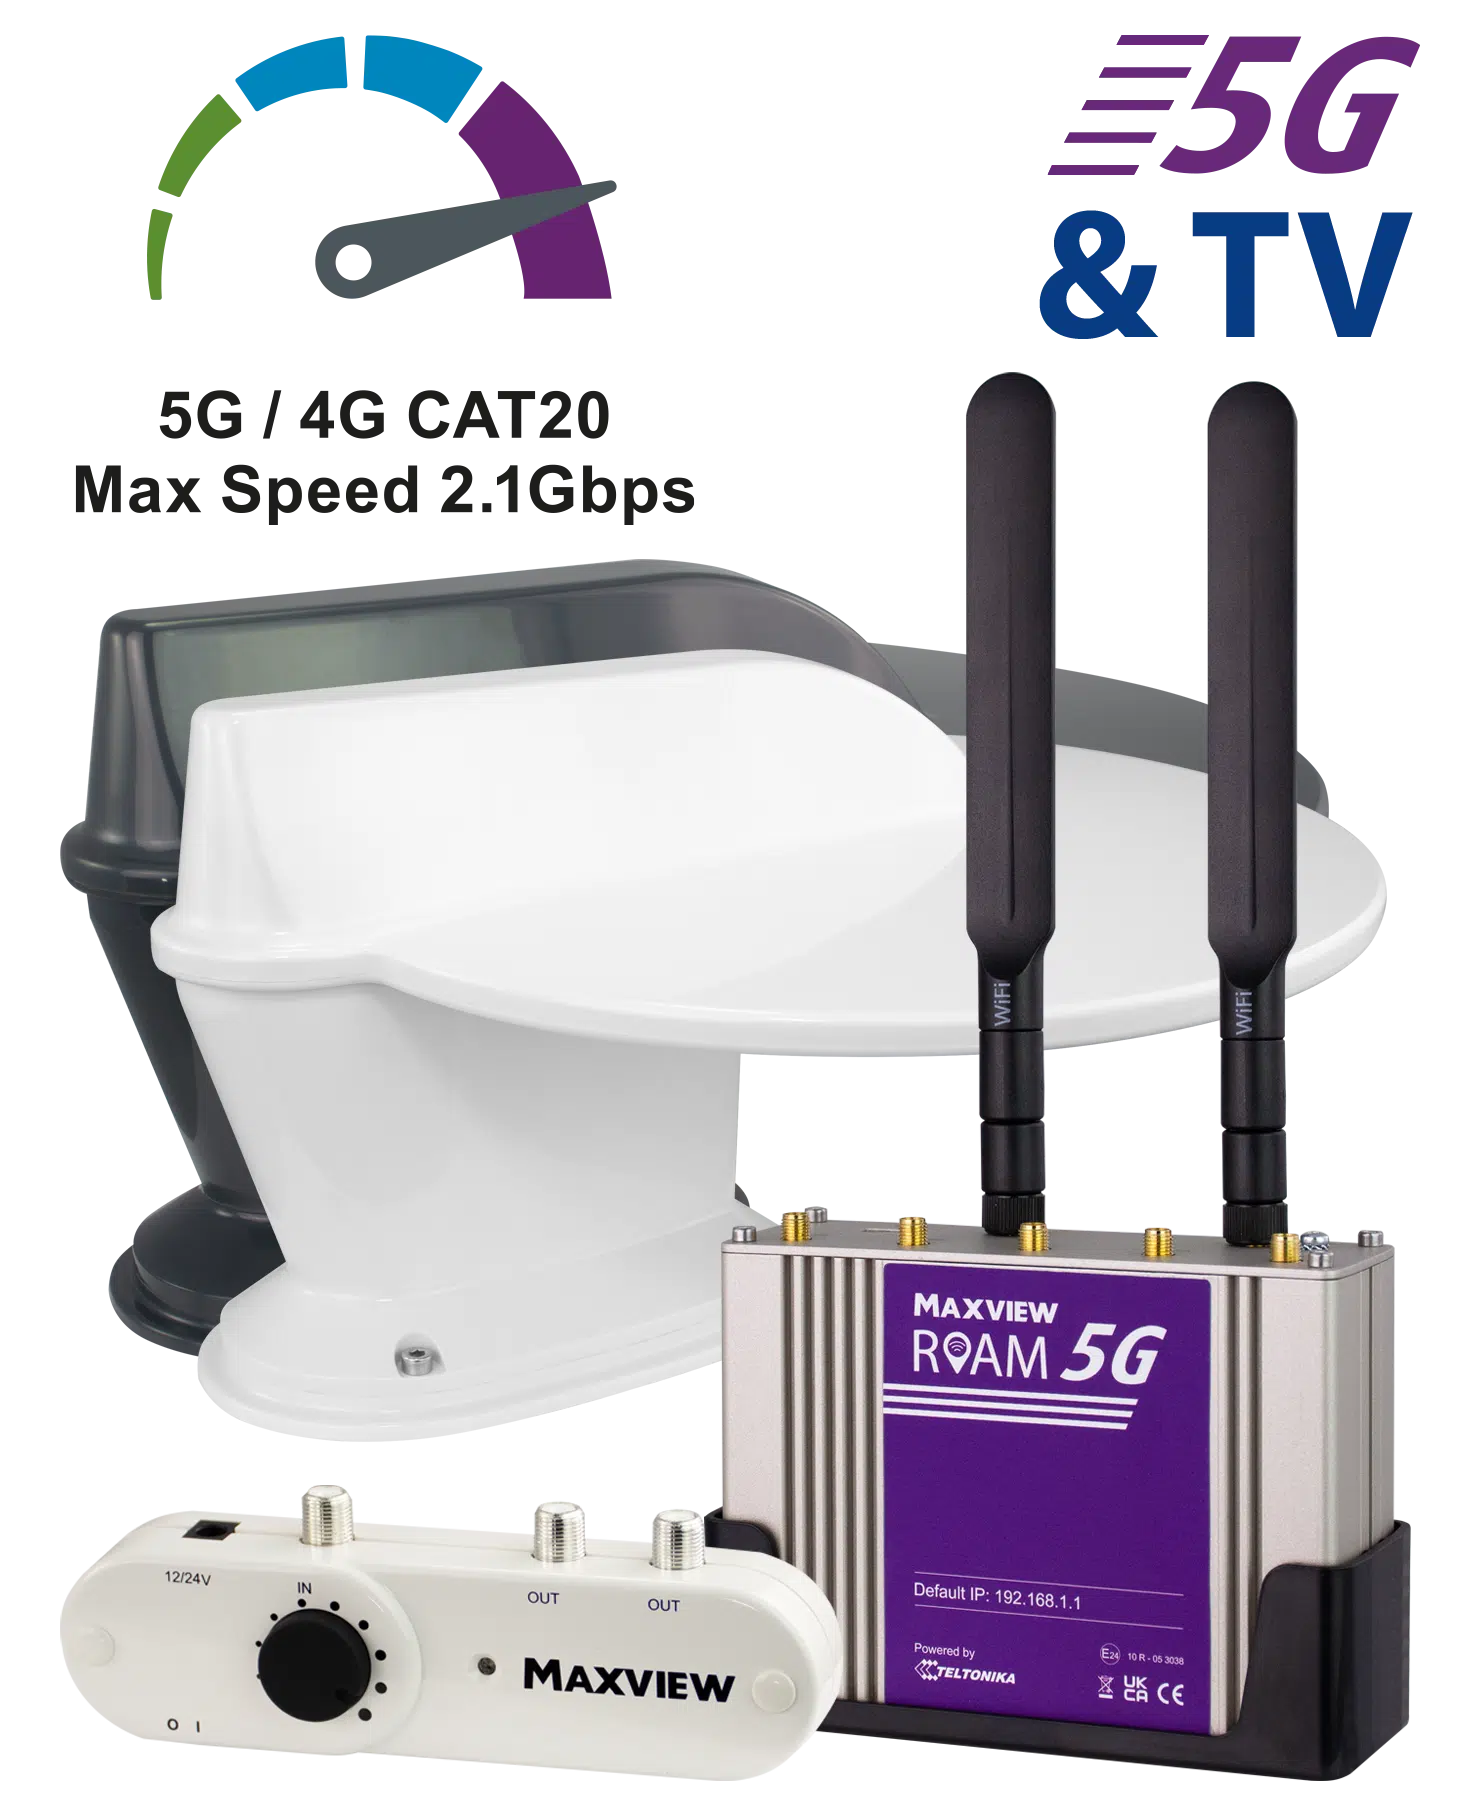 Maxview Roam 5g Combo White Wifi System